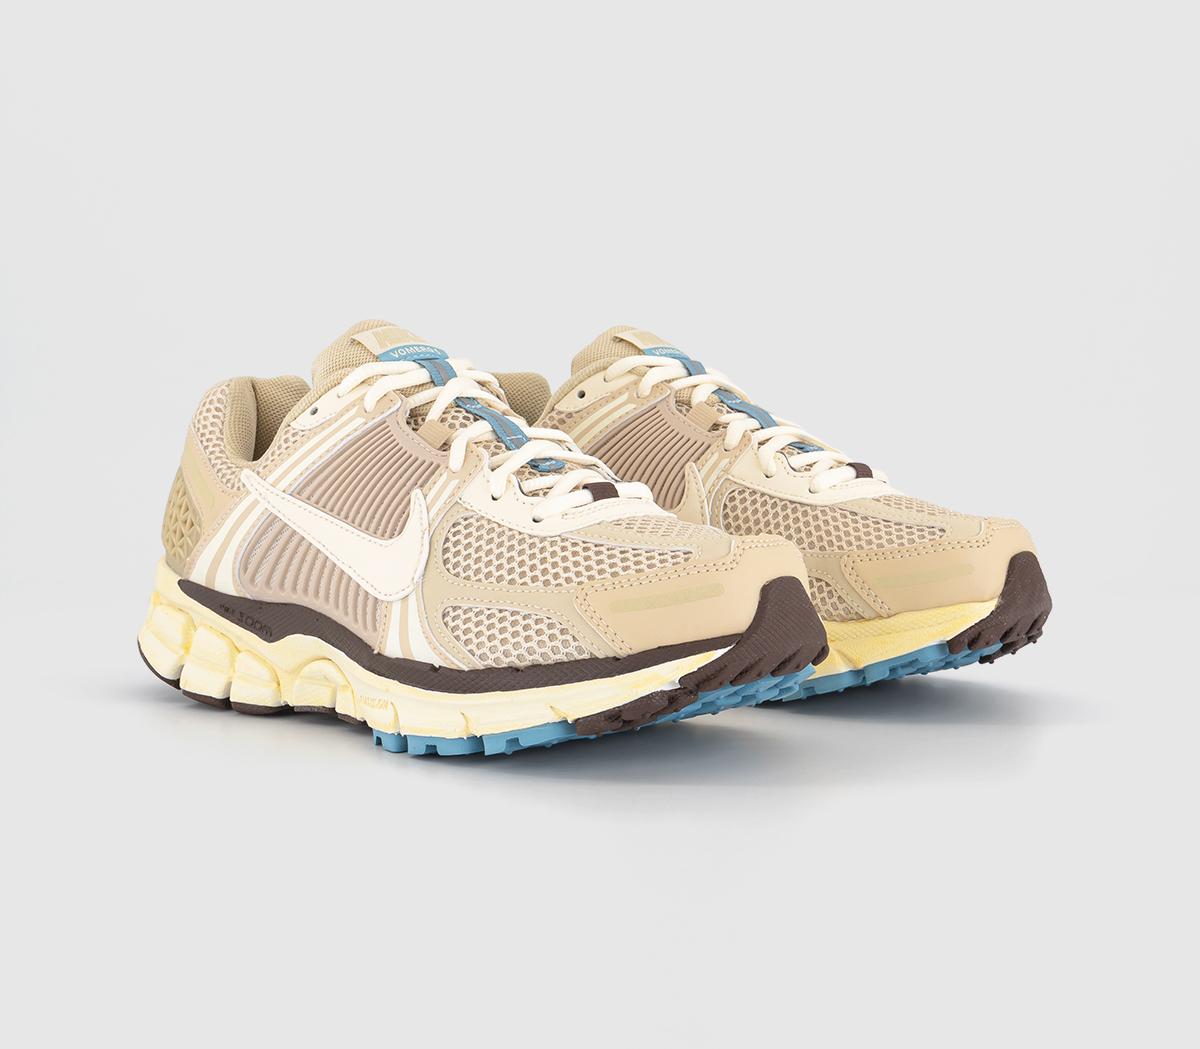 Nike Womens Zoom Vomero 5 Trainers Oatmeal Pale Ivory Sail Light Chocolate Worn Blue Natural, 10